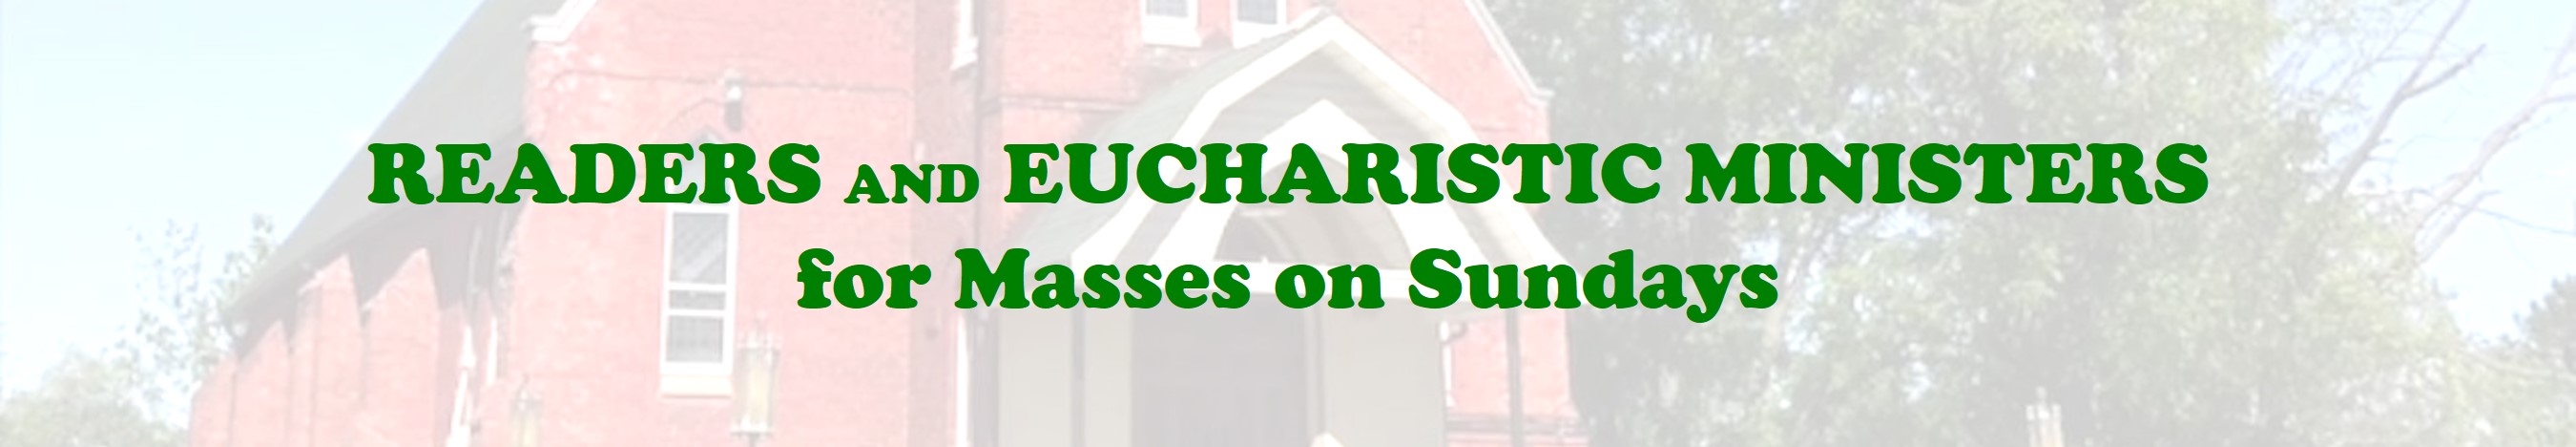 Header: Sunday Readers and Eucharistic Ministers